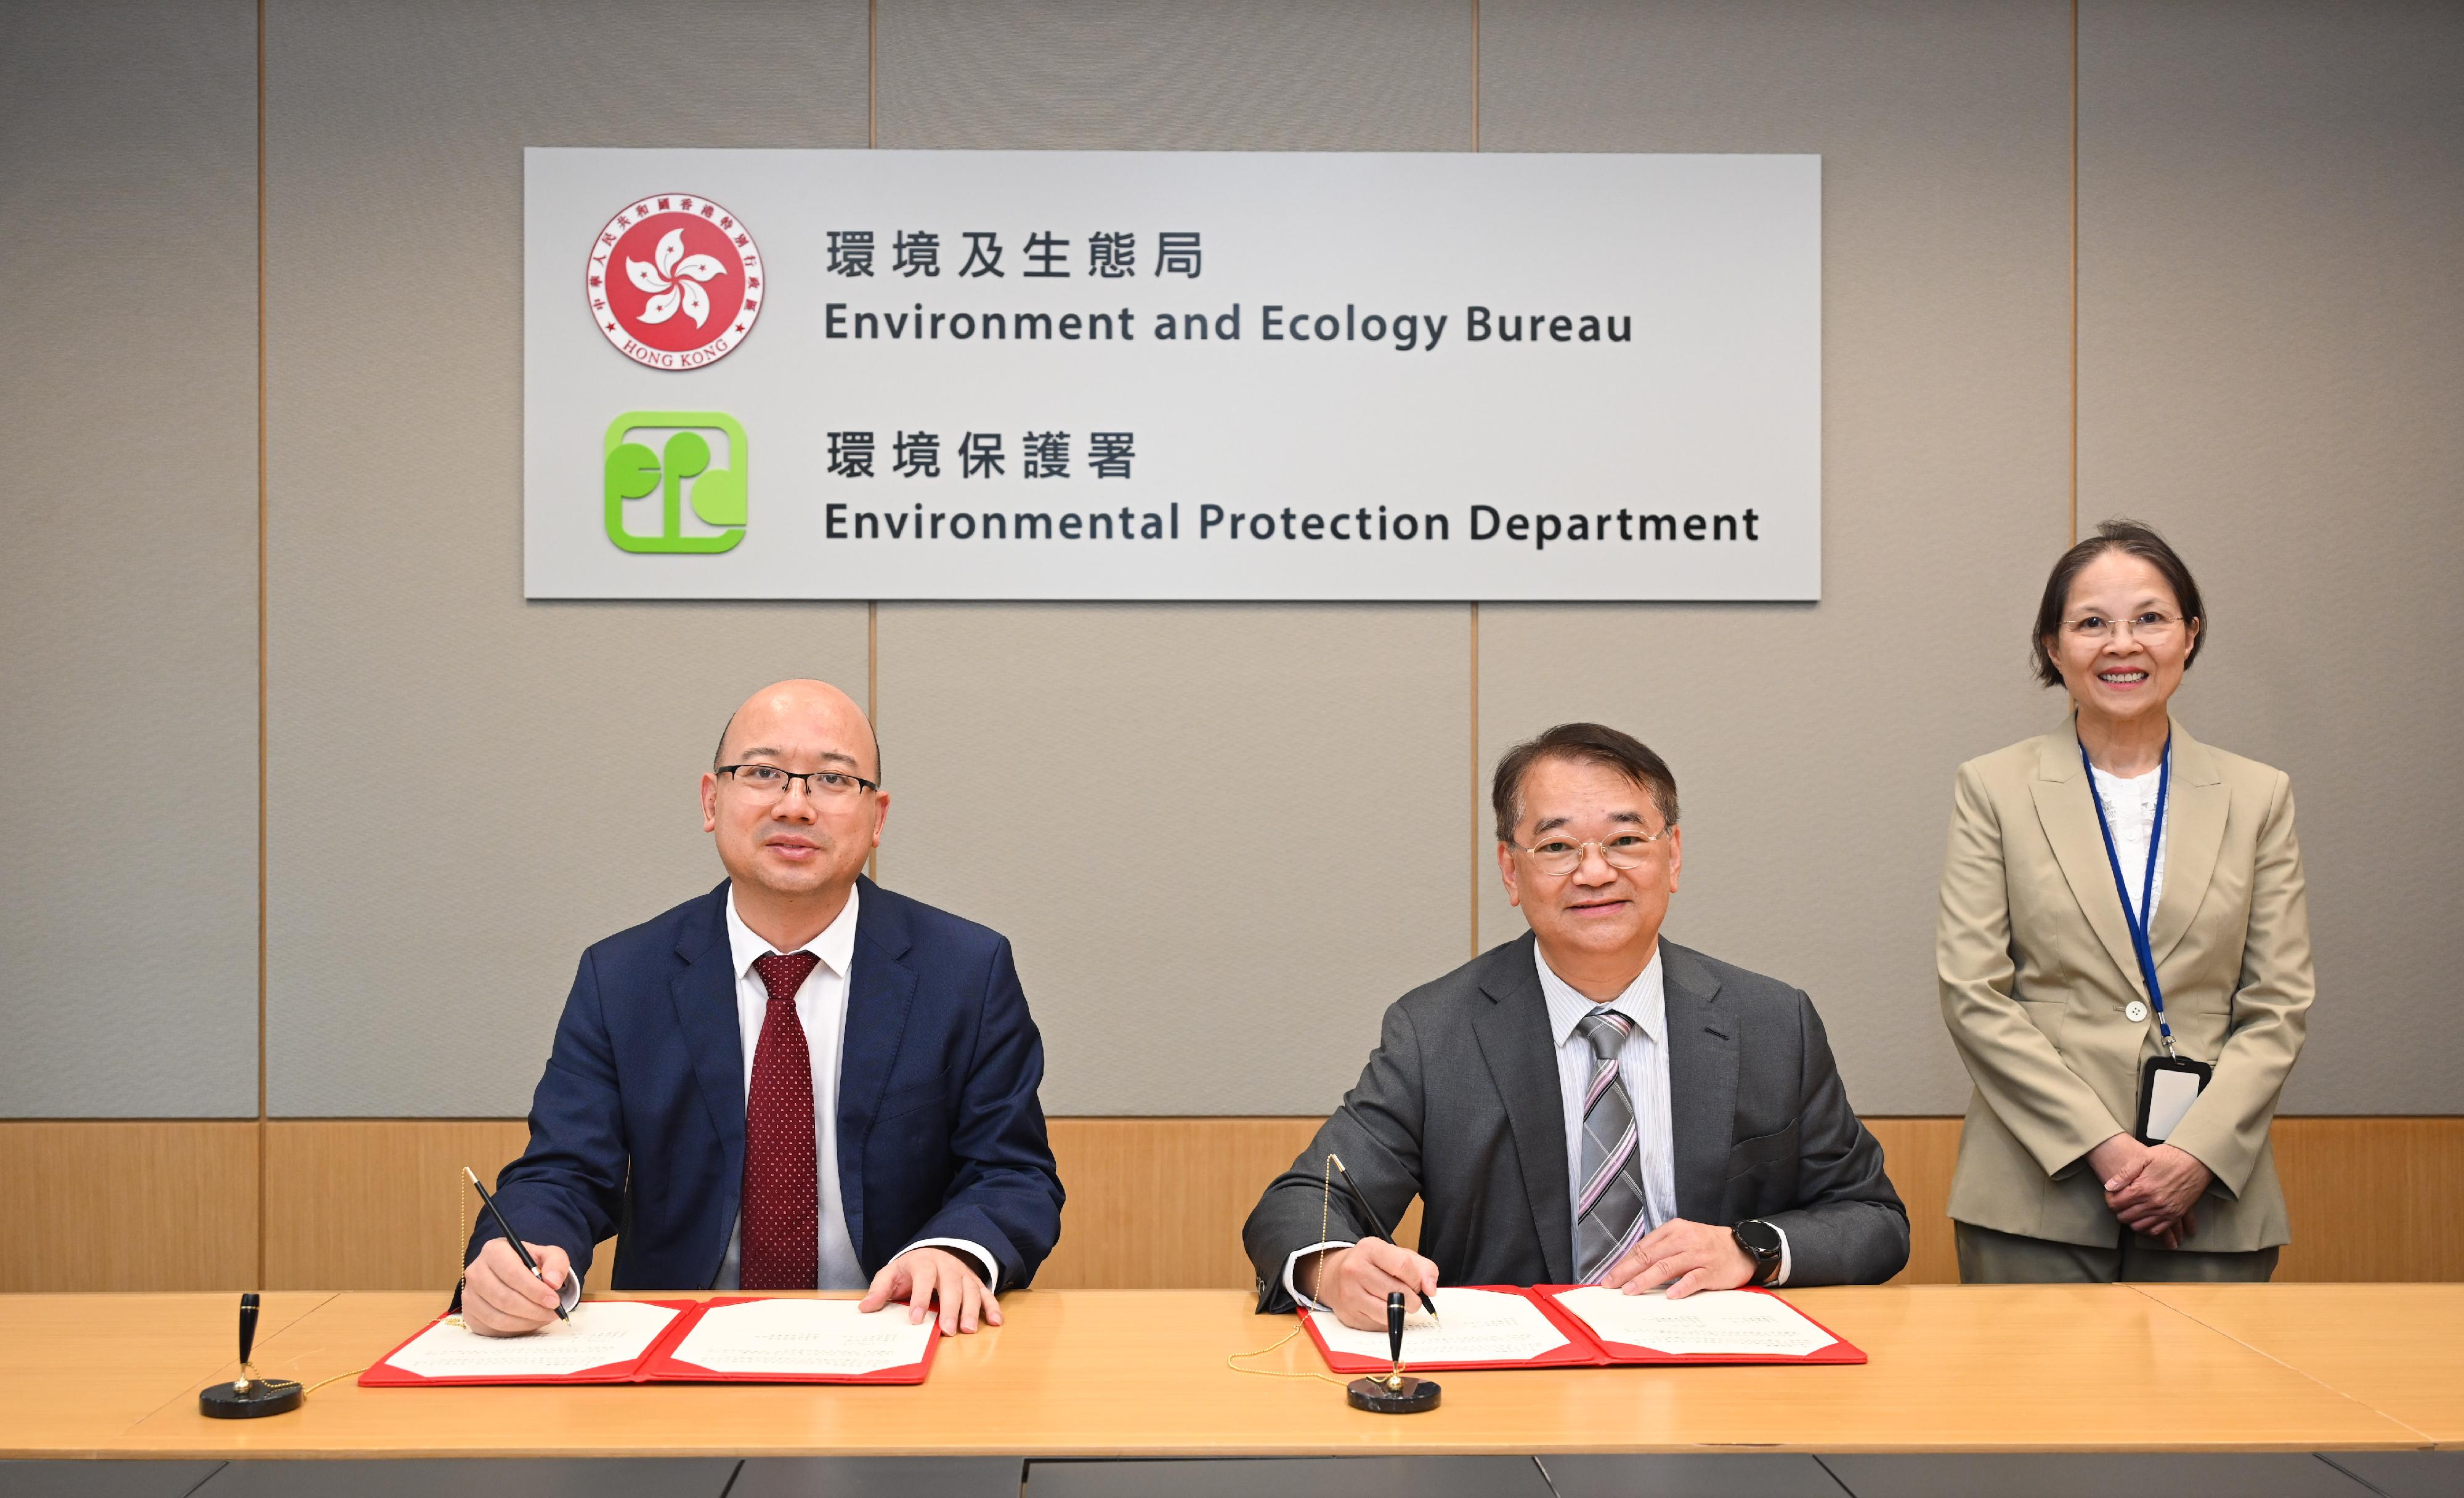 The Environmental Protection Department today (September 15) signed the Cooperation Arrangement for Raising Awareness of Ecological and Environmental Protection with the Center for Environmental Education and Communications of the Ministry of Ecology and Environment, to enhance co-operation on raising awareness of ecological and environmental protection. Picture shows the Director of Environmental Protection, Dr Samuel Chui (middle), and the General Director of the Center for Environmental Education and Communications of the Ministry of Ecology and Environment, Mr Tian Chengchuan (left), signing the Cooperation Arrangement, witnessed by the Under Secretary for Environment and Ecology, Miss Diane Wong (right).